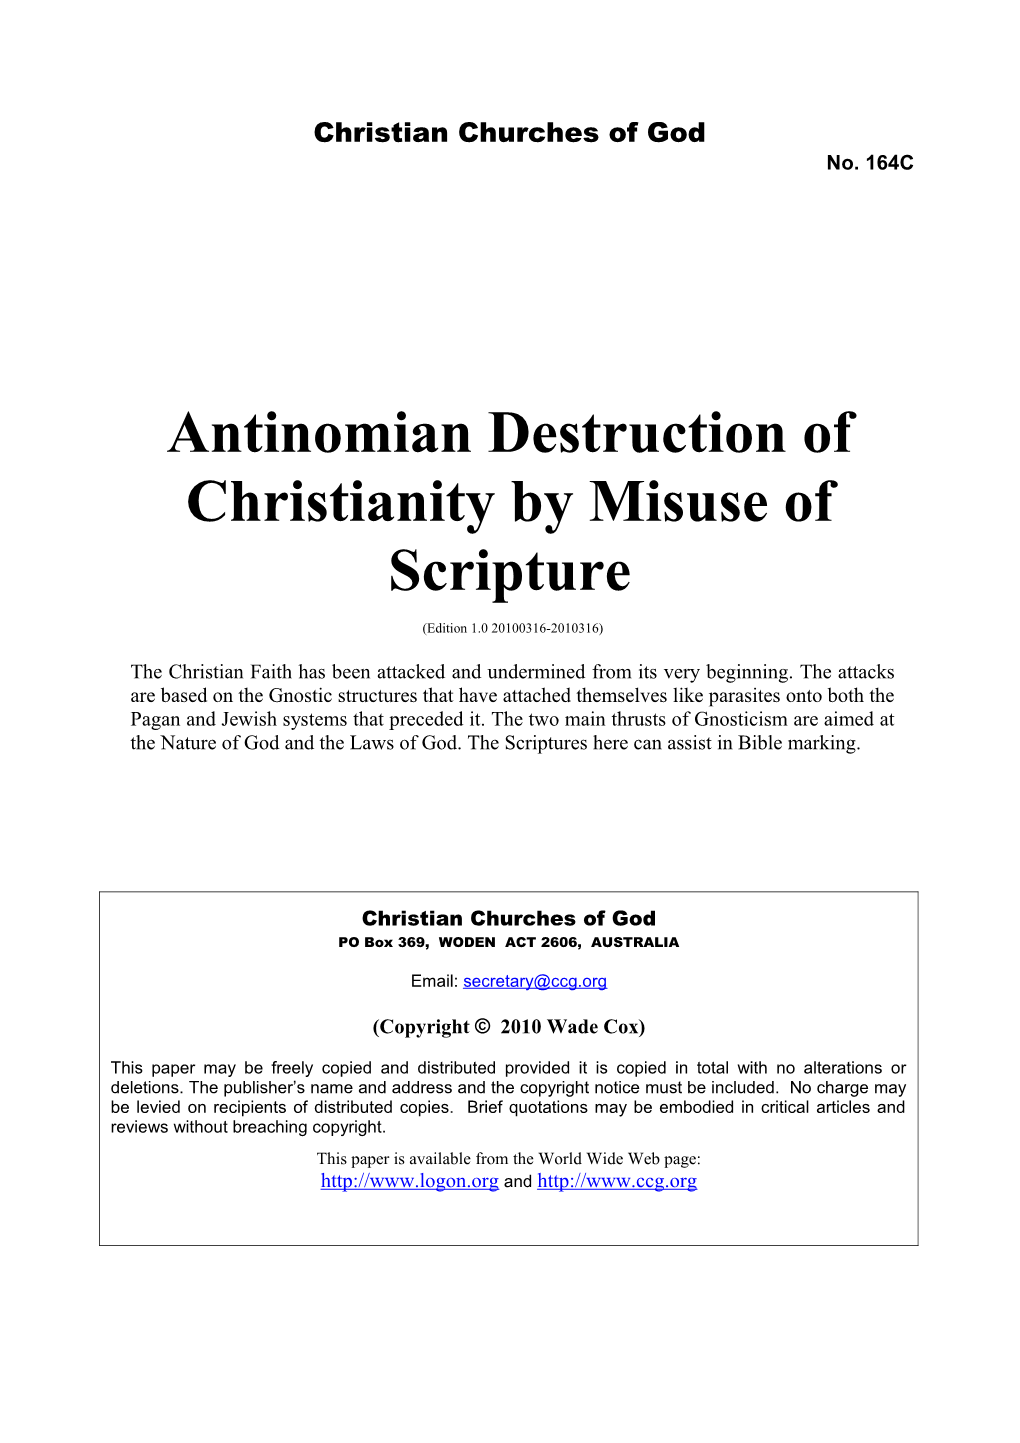 Antinomian Destruction of Christianity by Misuse of Scripture (No. 164C)